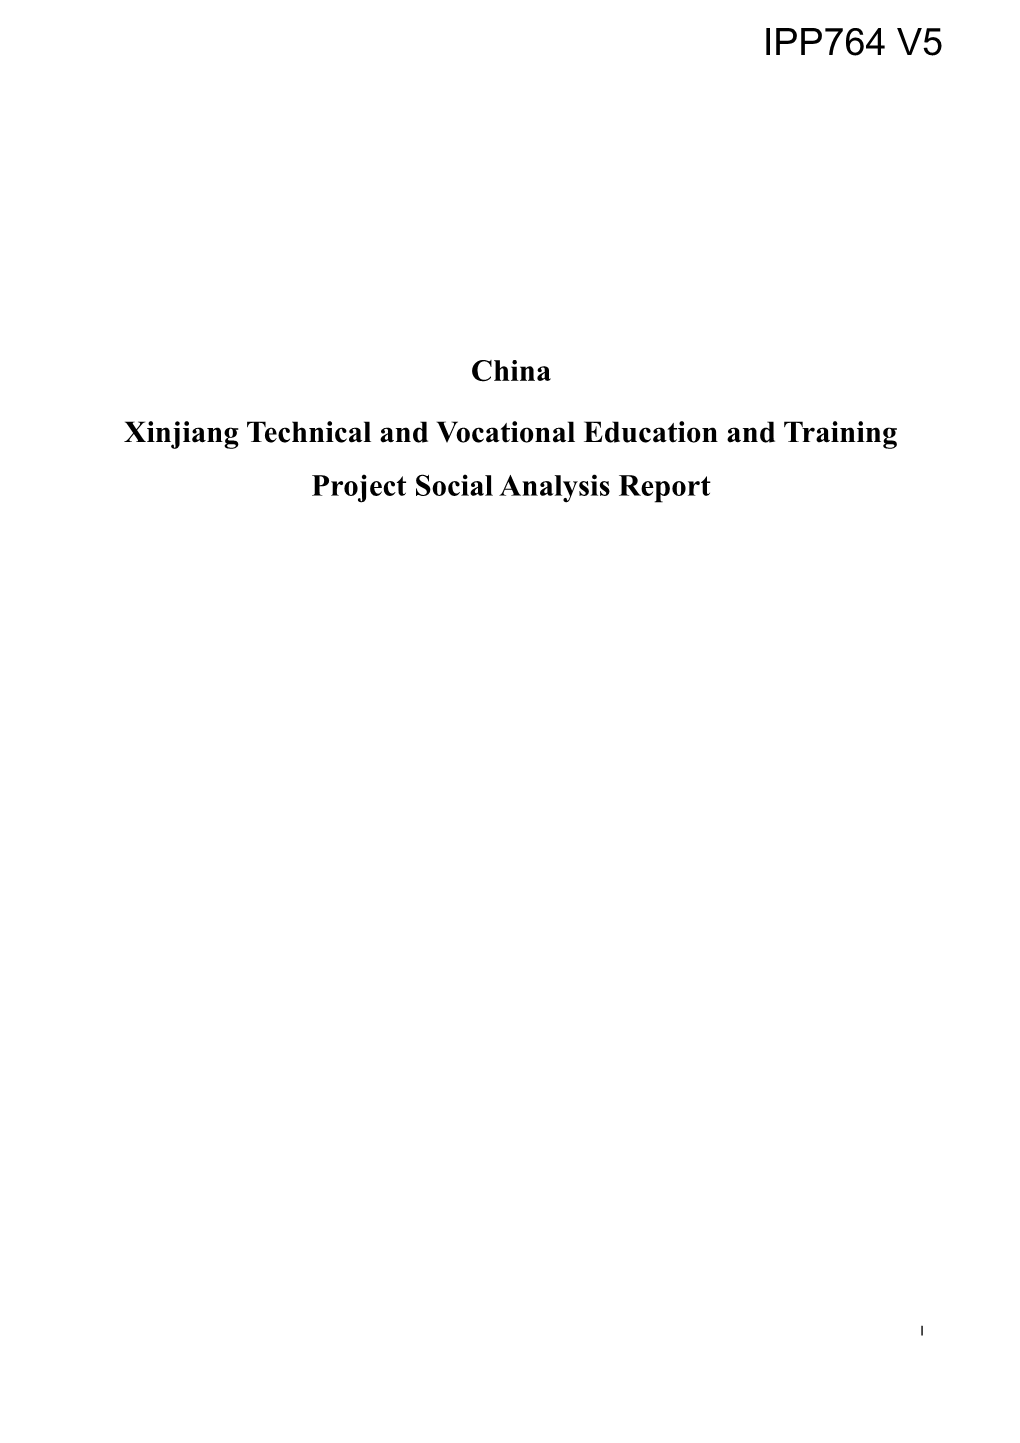 The Social Analysis Report of the Project of the World Bank Loan on Xinjiang Vocational